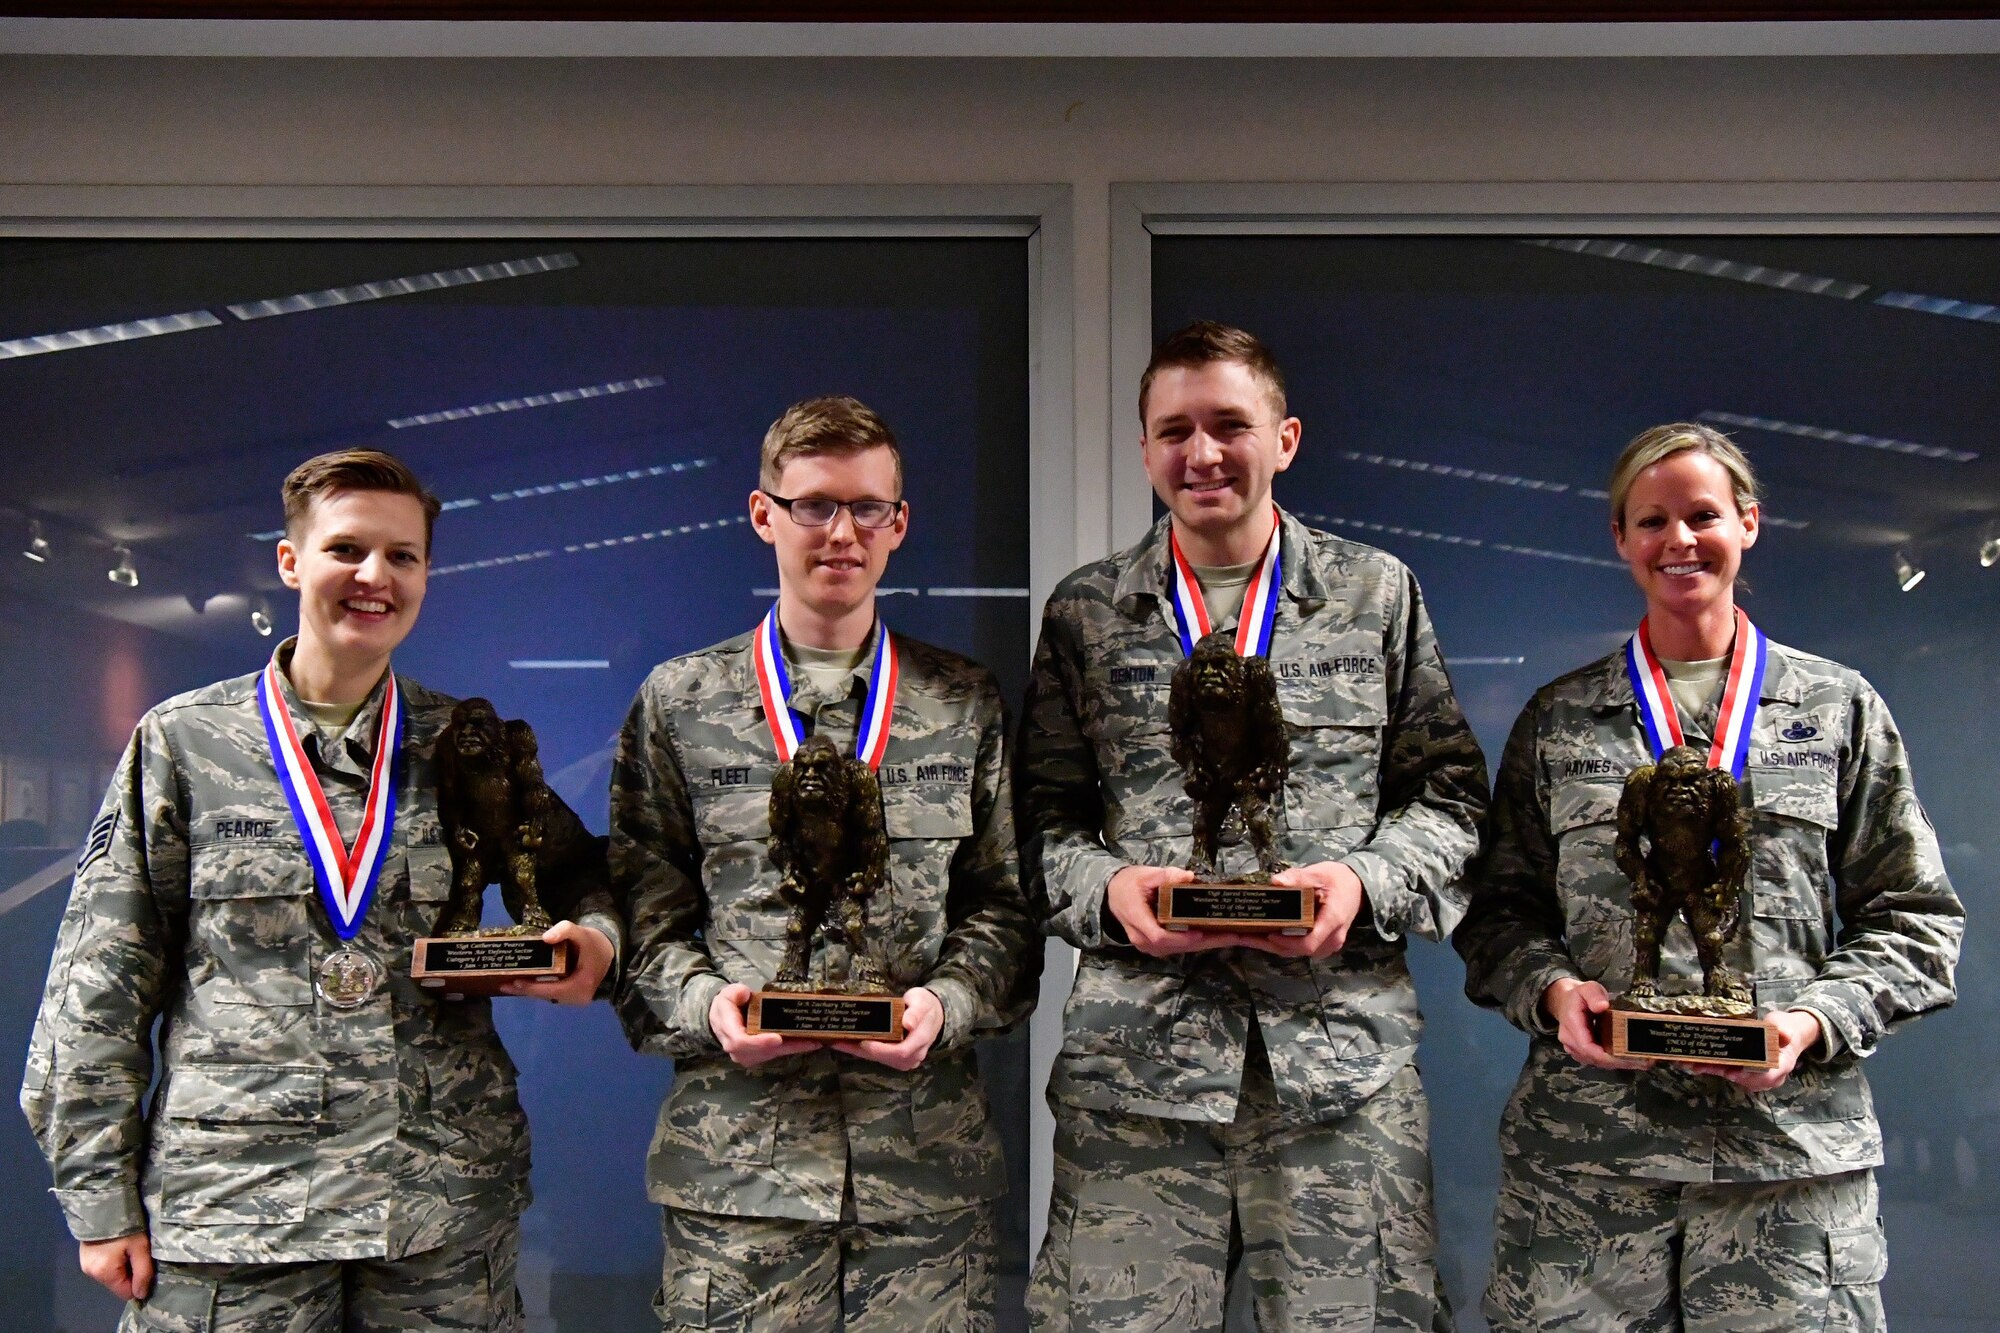 The Western Air Defense Sector annual award winners pose with their Bigfoot trophy Dec. 1, 2018 on Joint Base Lewis-McChord, Washington. Pictured from left to right are Category I Drill Status Guardsmen of the Year Staff Sgt. Catherine Pearce, 225th Support Squadron emergency management specialist; Airman of the Year Senior Airman Zachary Fleet, 225th Air Defense Squadron interface control technician; NCO of the Year Staff Sgt. Jared Denton, 225th ADS NCOIC of surveillance training; and SNCO of the Year Master Sgt. Sara Haynes, 225th SS NCOIC of logistics.  Not pictured are: DSG Company Grade Officer Capt. Colette Muller, 225th Air Defense Group public affairs officer; CGO of the Year Capt. Marvin Yamada, 225th ADS weapons flight commander; Category I Civilian of the Year Barry Arzberger, 225th SS HVAC technician; and Category II Civilian of the Year Bruce Robie; 225th SS National Airspace System Defense program manager.  (U.S. Air National Guard photo by Maj. Kimberly D. Burke)